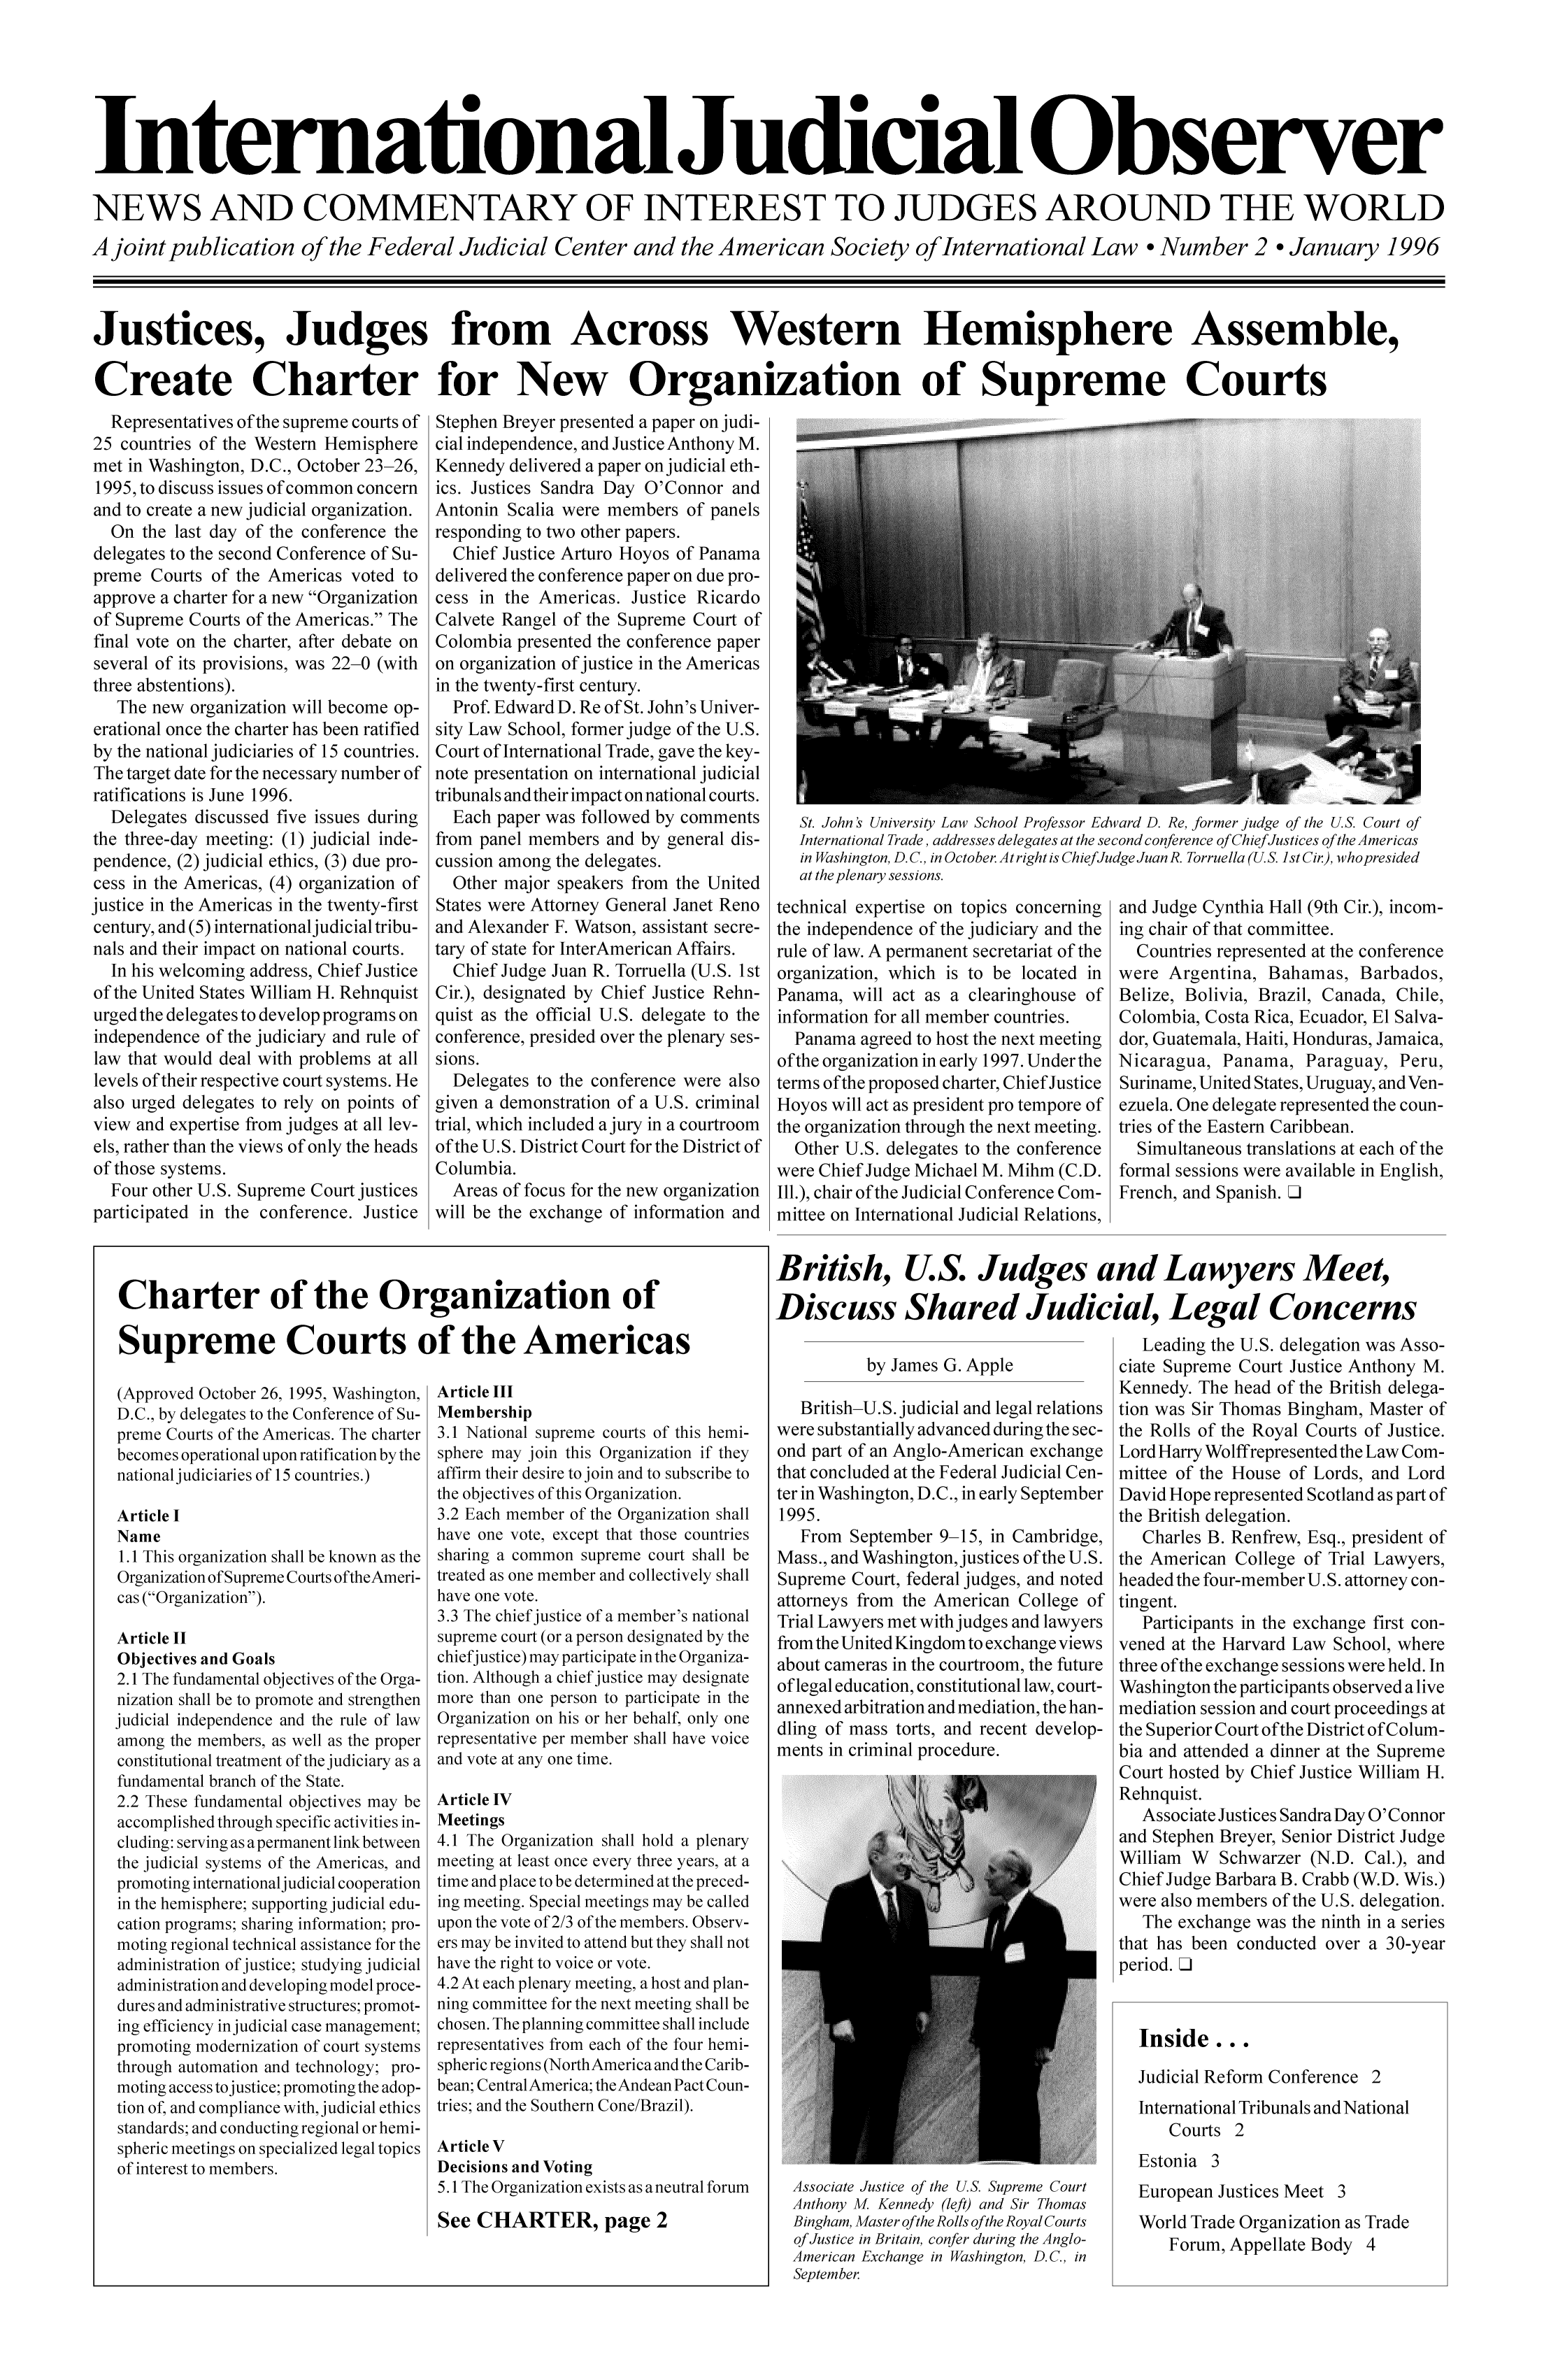 handle is hein.congcourts/ijudiob0002 and id is 1 raw text is: International uicial bserve
NEWS AND COMMENTARY OF INTEREST TO JUDGES AROUND THE WOR
A joint publication of the Federal Judicial Center and the American Society of International Law  Number 2  January 1
Justices, Judges from Across Western Hemisphere Assemble,
Create Charter for New Organization of Supreme Courts

Representatives of the supreme courts of
25 countries of the Western Hemisphere
met in Washington, D.C., October 23-26,
1995, to discuss issues of common concern
and to create a new judicial organization.
On the last day of the conference the
delegates to the second Conference of Su-
preme Courts of the Americas voted to
approve a charter for a new Organization
of Supreme Courts of the Americas. The
final vote on the charter, after debate on
several of its provisions, was 22-0 (with
three abstentions).
The new organization will become op-
erational once the charter has been ratified
by the national judiciaries of 15 countries.
The target date for the necessary number of
ratifications is June 1996.
Delegates discussed five issues during
the three-day meeting: (1) judicial inde-
pendence, (2) judicial ethics, (3) due pro-
cess in the Americas, (4) organization of
justice in the Americas in the twenty-first
century, and (5) international judicial tribu-
nals and their impact on national courts.
In his welcoming address, Chief Justice
of the United States William H. Rehnquist
urged the delegates to develop programs on
independence of the judiciary and rule of
law that would deal with problems at all
levels of their respective court systems. He
also urged delegates to rely on points of
view and expertise from judges at all lev-
els, rather than the views of only the heads
of those systems.
Four other U.S. Supreme Court justices
participated in the conference. Justice

Stephen Breyer presented a paper on judi-
cial independence, and Justice Anthony M.
Kennedy delivered a paper on judicial eth-
ics. Justices Sandra Day O'Connor and
Antonin Scalia were members of panels
responding to two other papers.
Chief Justice Arturo Hoyos of Panama
delivered the conference paper on due pro-
cess in the Americas. Justice Ricardo
Calvete Rangel of the Supreme Court of
Colombia presented the conference paper
on organization of justice in the Americas
in the twenty-first century.
Prof. Edward D. Re of St. John's Univer-
sity Law School, former judge of the U.S.
Court of International Trade, gave the key-
note presentation on international judicial
tribunals and their impact on national courts.
Each paper was followed by comments
from panel members and by general dis-
cussion among the delegates.
Other major speakers from the United
States were Attorney General Janet Reno
and Alexander F. Watson, assistant secre-
tary of state for InterAmerican Affairs.
Chief Judge Juan R. Torruella (U.S. 1st
Cir.), designated by Chief Justice Rehn-
quist as the official U.S. delegate to the
conference, presided over the plenary ses-
sions.
Delegates to the conference were also
given a demonstration of a U.S. criminal
trial, which included a jury in a courtroom
of the U.S. District Court for the District of
Columbia.
Areas of focus for the new organization
will be the exchange of information and

St. John's University Law School Professor Edward D. Re, former judge of the U.S. Court of
International Trade, addresses delegates at the second conference of ChiefJustices ofthe Americas
in Washington, D.C., in October Atright is ChiefJudge Juan R. Torruella (U.S. 1st Cir.), whopresided
at the plenary sessions.

technical expertise on topics concerning
the independence of the judiciary and the
rule of law. A permanent secretariat of the
organization, which is to be located in
Panama, will act as a clearinghouse of
information for all member countries.
Panama agreed to host the next meeting
ofthe organization in early 1997. Under the
terms ofthe proposed charter, Chief Justice
Hoyos will act as president pro tempore of
the organization through the next meeting.
Other U.S. delegates to the conference
were Chief Judge Michael M. Mihm (C.D.
Ill.), chair of the Judicial Conference Com-
mittee on International Judicial Relations,

and Judge Cynthia Hall (9th Cir.), incom-
ing chair of that committee.
Countries represented at the conference
were Argentina, Bahamas, Barbados,
Belize, Bolivia, Brazil, Canada, Chile,
Colombia, Costa Rica, Ecuador, El Salva-
dor, Guatemala, Haiti, Honduras, Jamaica,
Nicaragua, Panama, Paraguay, Peru,
Suriname, United States, Uruguay, and Ven-
ezuela. One delegate represented the coun-
tries of the Eastern Caribbean.
Simultaneous translations at each of the
formal sessions were available in English,
French, and Spanish. Ii

Charter of the Organization of
Supreme Courts of the Americas

(Approved October 26, 1995, Washington,
D.C., by delegates to the Conference of Su-
preme Courts of the Americas. The charter
becomes operational upon ratification by the
national judiciaries of 15 countries.)
Article I
Name
1.1 This organization shall be known as the
Organization of Supreme Courts oftheAmeri-
cas (Organization).
Article II
Objectives and Goals
2.1 The fundamental objectives of the Orga-
nization shall be to promote and strengthen
judicial independence and the rule of law
among the members, as well as the proper
constitutional treatment of the judiciary as a
fundamental branch of the State.
2.2 These fundamental objectives may be
accomplished through specific activities in-
cluding: serving as a permanent link between
the judicial systems of the Americas, and
promoting internationaljudicial cooperation
in the hemisphere; supporting judicial edu-
cation programs; sharing information; pro-
moting regional technical assistance for the
administration of justice; studying judicial
administration and developing model proce-
dures and administrative structures; promot-
ing efficiency in judicial case management;
promoting modernization of court systems
through automation and technology; pro-
moting access tojustice; promoting the adop-
tion of, and compliance with, judicial ethics
standards; and conducting regional or hemi-
spheric meetings on specialized legal topics
of interest to members.

Article III
Membership
3.1 National supreme courts of this hemi-
sphere may join this Organization if they
affirm their desire to join and to subscribe to
the objectives of this Organization.
3.2 Each member of the Organization shall
have one vote, except that those countries
sharing a common supreme court shall be
treated as one member and collectively shall
have one vote.
3.3 The chief justice of a member's national
supreme court (or a person designated by the
chiefjustice) may participate in the Organiza-
tion. Although a chief justice may designate
more than one person to participate in the
Organization on his or her behalf, only one
representative per member shall have voice
and vote at any one time.
Article IV
Meetings
4.1 The Organization shall hold a plenary
meeting at least once every three years, at a
time and place to be determined at the preced-
ing meeting. Special meetings may be called
upon the vote of 2/3 of the members. Observ-
ers may be invited to attend but they shall not
have the right to voice or vote.
4.2 At each plenary meeting, a host and plan-
ning committee for the next meeting shall be
chosen. The planning committee shall include
representatives from each of the four hemi-
spheric regions (NorthAmerica and the Carib-
bean; CentralAmerica; theAndean Pact Coun-
tries; and the Southern Cone/Brazil).
Article V
Decisions and Voting
5.1 The Organization exists as a neutral forum
See CHARTER, page 2

British, U.S. Judges and Lawyers Meet,
Discuss Shared Judicial, Legal Concerns

by James G. Apple
British-U.S. judicial and legal relations
were substantially advanced during the sec-
ond part of an Anglo-American exchange
that concluded at the Federal Judicial Cen-
ter in Washington, D.C., in early September
1995.
From September 9-15, in Cambridge,
Mass., and Washington, justices of the U.S.
Supreme Court, federal judges, and noted
attorneys from the American College of
Trial Lawyers met with judges and lawyers
from the United Kingdom to exchange views
about cameras in the courtroom, the future
of legal education, constitutional law, court-
annexed arbitration and mediation, the han-
dling of mass torts, and recent develop-
ments in criminal procedure.

Associate Justice of the U.S. Supreme Court
Anthony M Kennedy (left) and Sir Thomas
Bingham, Master of the Rolls ofthe Royal Courts
of Justice in Britain, confer during the Anglo-
American Exchange in Washington, D.C., in
September

Leading the U.S. delegation was Asso-
ciate Supreme Court Justice Anthony M.
Kennedy. The head of the British delega-
tion was Sir Thomas Bingham, Master of
the Rolls of the Royal Courts of Justice.
Lord Harry Wolffrepresented the Law Com-
mittee of the House of Lords, and Lord
David Hope represented Scotland as part of
the British delegation.
Charles B. Renfrew, Esq., president of
the American College of Trial Lawyers,
headed the four-member U.S. attorney con-
tingent.
Participants in the exchange first con-
vened at the Harvard Law School, where
three ofthe exchange sessions were held. In
Washington the participants observed a live
mediation session and court proceedings at
the Superior Court ofthe District of Colum-
bia and attended a dinner at the Supreme
Court hosted by Chief Justice William H.
Rehnquist.
Associate Justices Sandra Day O'Connor
and Stephen Breyer, Senior District Judge
William W Schwarzer (N.D. Cal.), and
Chief Judge Barbara B. Crabb (W.D. Wis.)
were also members of the U.S. delegation.
The exchange was the ninth in a series
that has been conducted over a 30-year
period. Ll
Inside...
Judicial Reform Conference 2
International Tribunals and National
Courts 2
Estonia 3
European Justices Meet 3
World Trade Organization as Trade
Forum, Appellate Body 4

LD
r996


